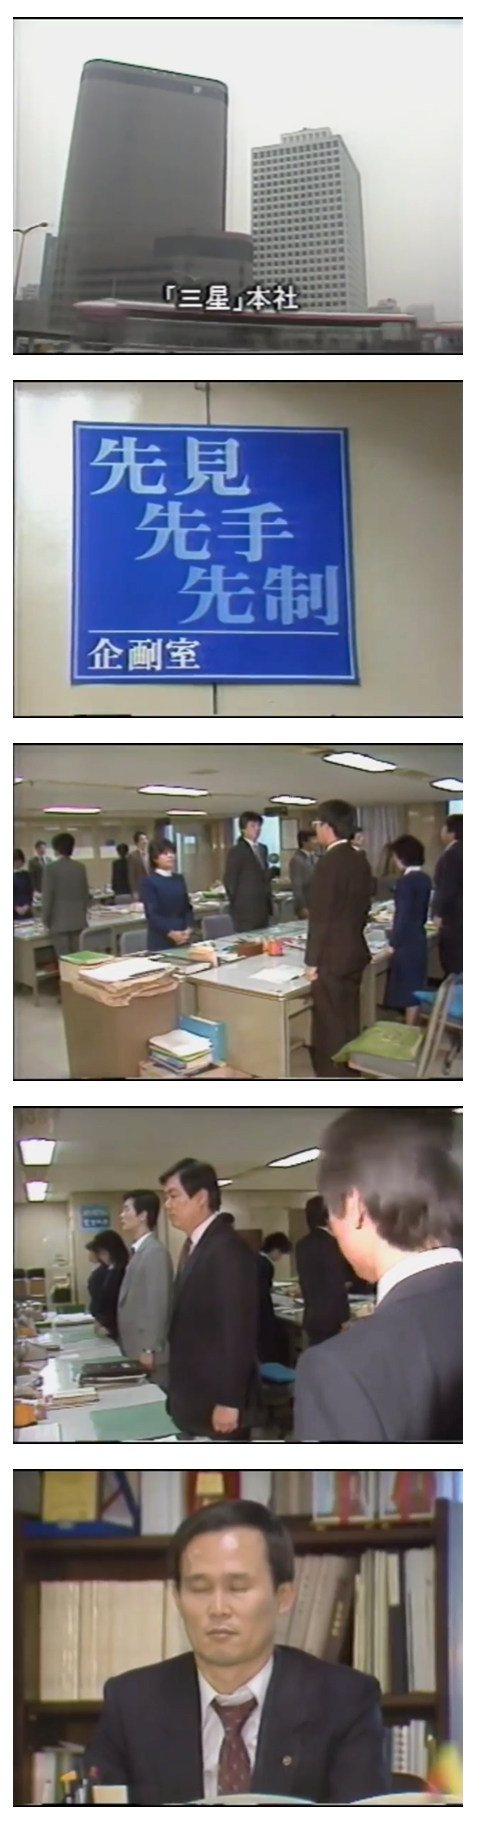 Samsung, which was reported by NHK in 1987.JPG